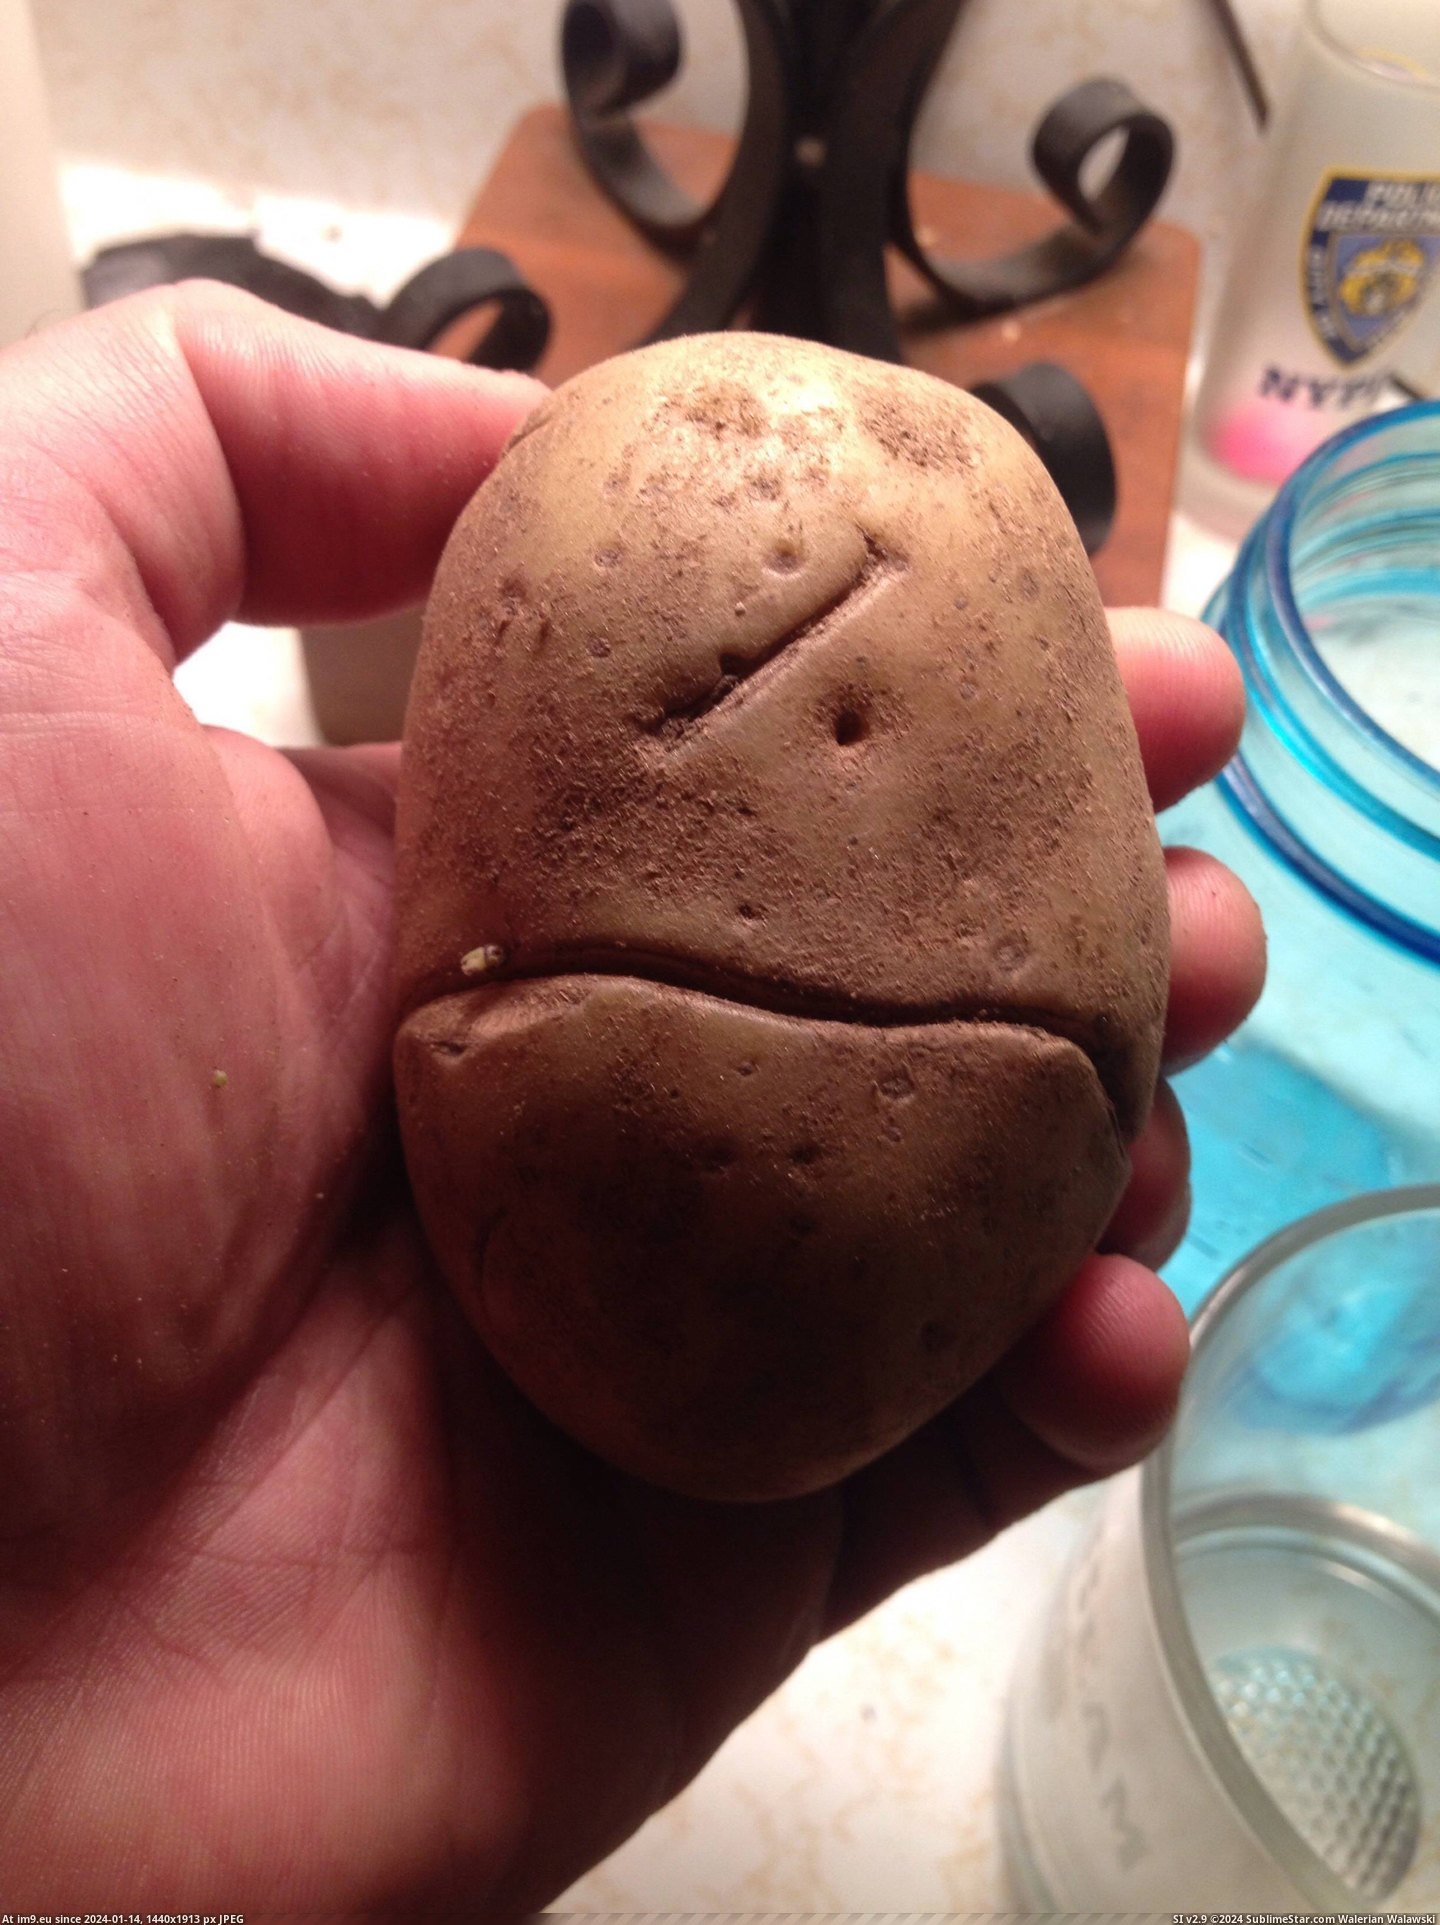 #One #Park #Potato #Eyed #South #Canadian [Mildlyinteresting] This potato looks like a one-eyed Canadian from South Park. Pic. (Image of album My r/MILDLYINTERESTING favs))